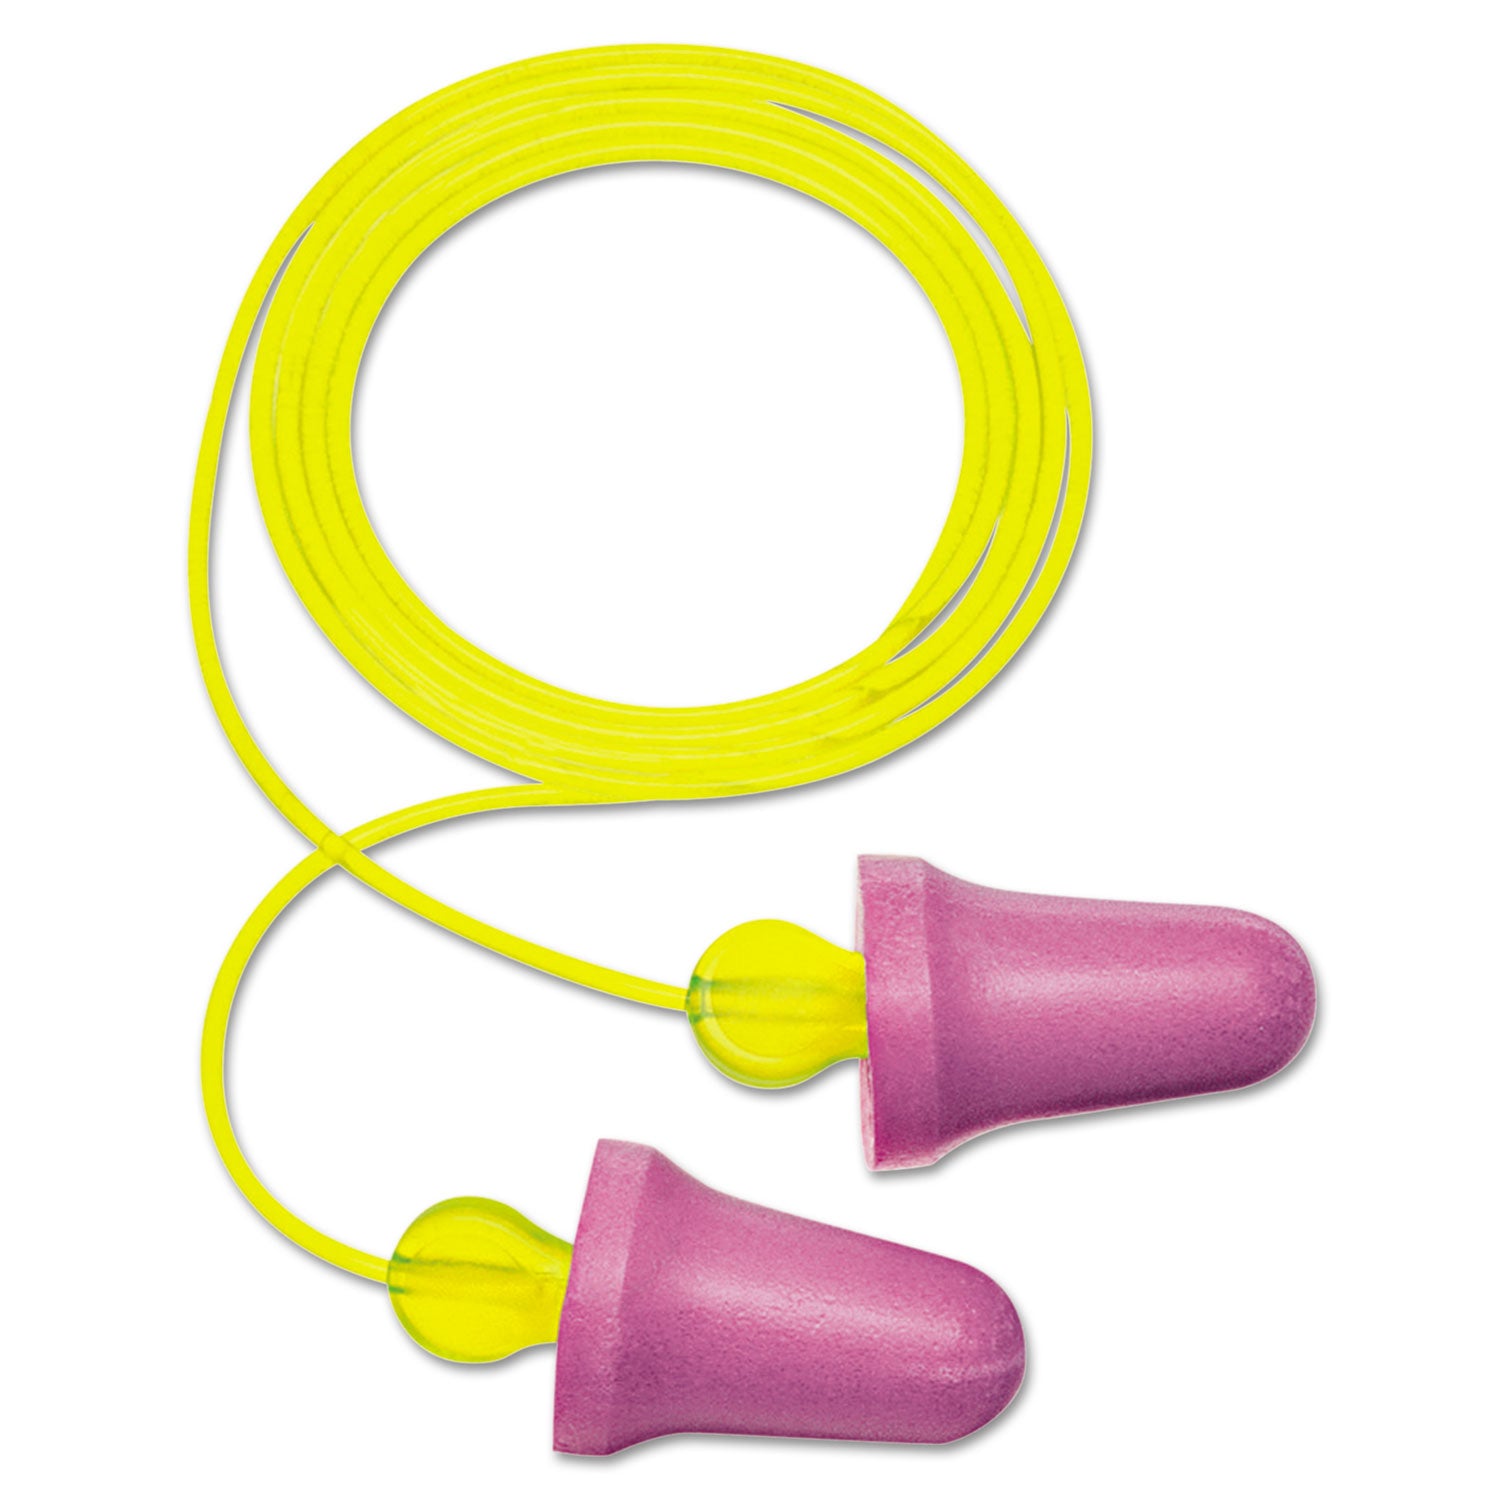 no-touch-push-to-fit-single-use-earplugs-corded-29-db-nrr-purple-yellow-100-pairs_mmmp2001 - 1